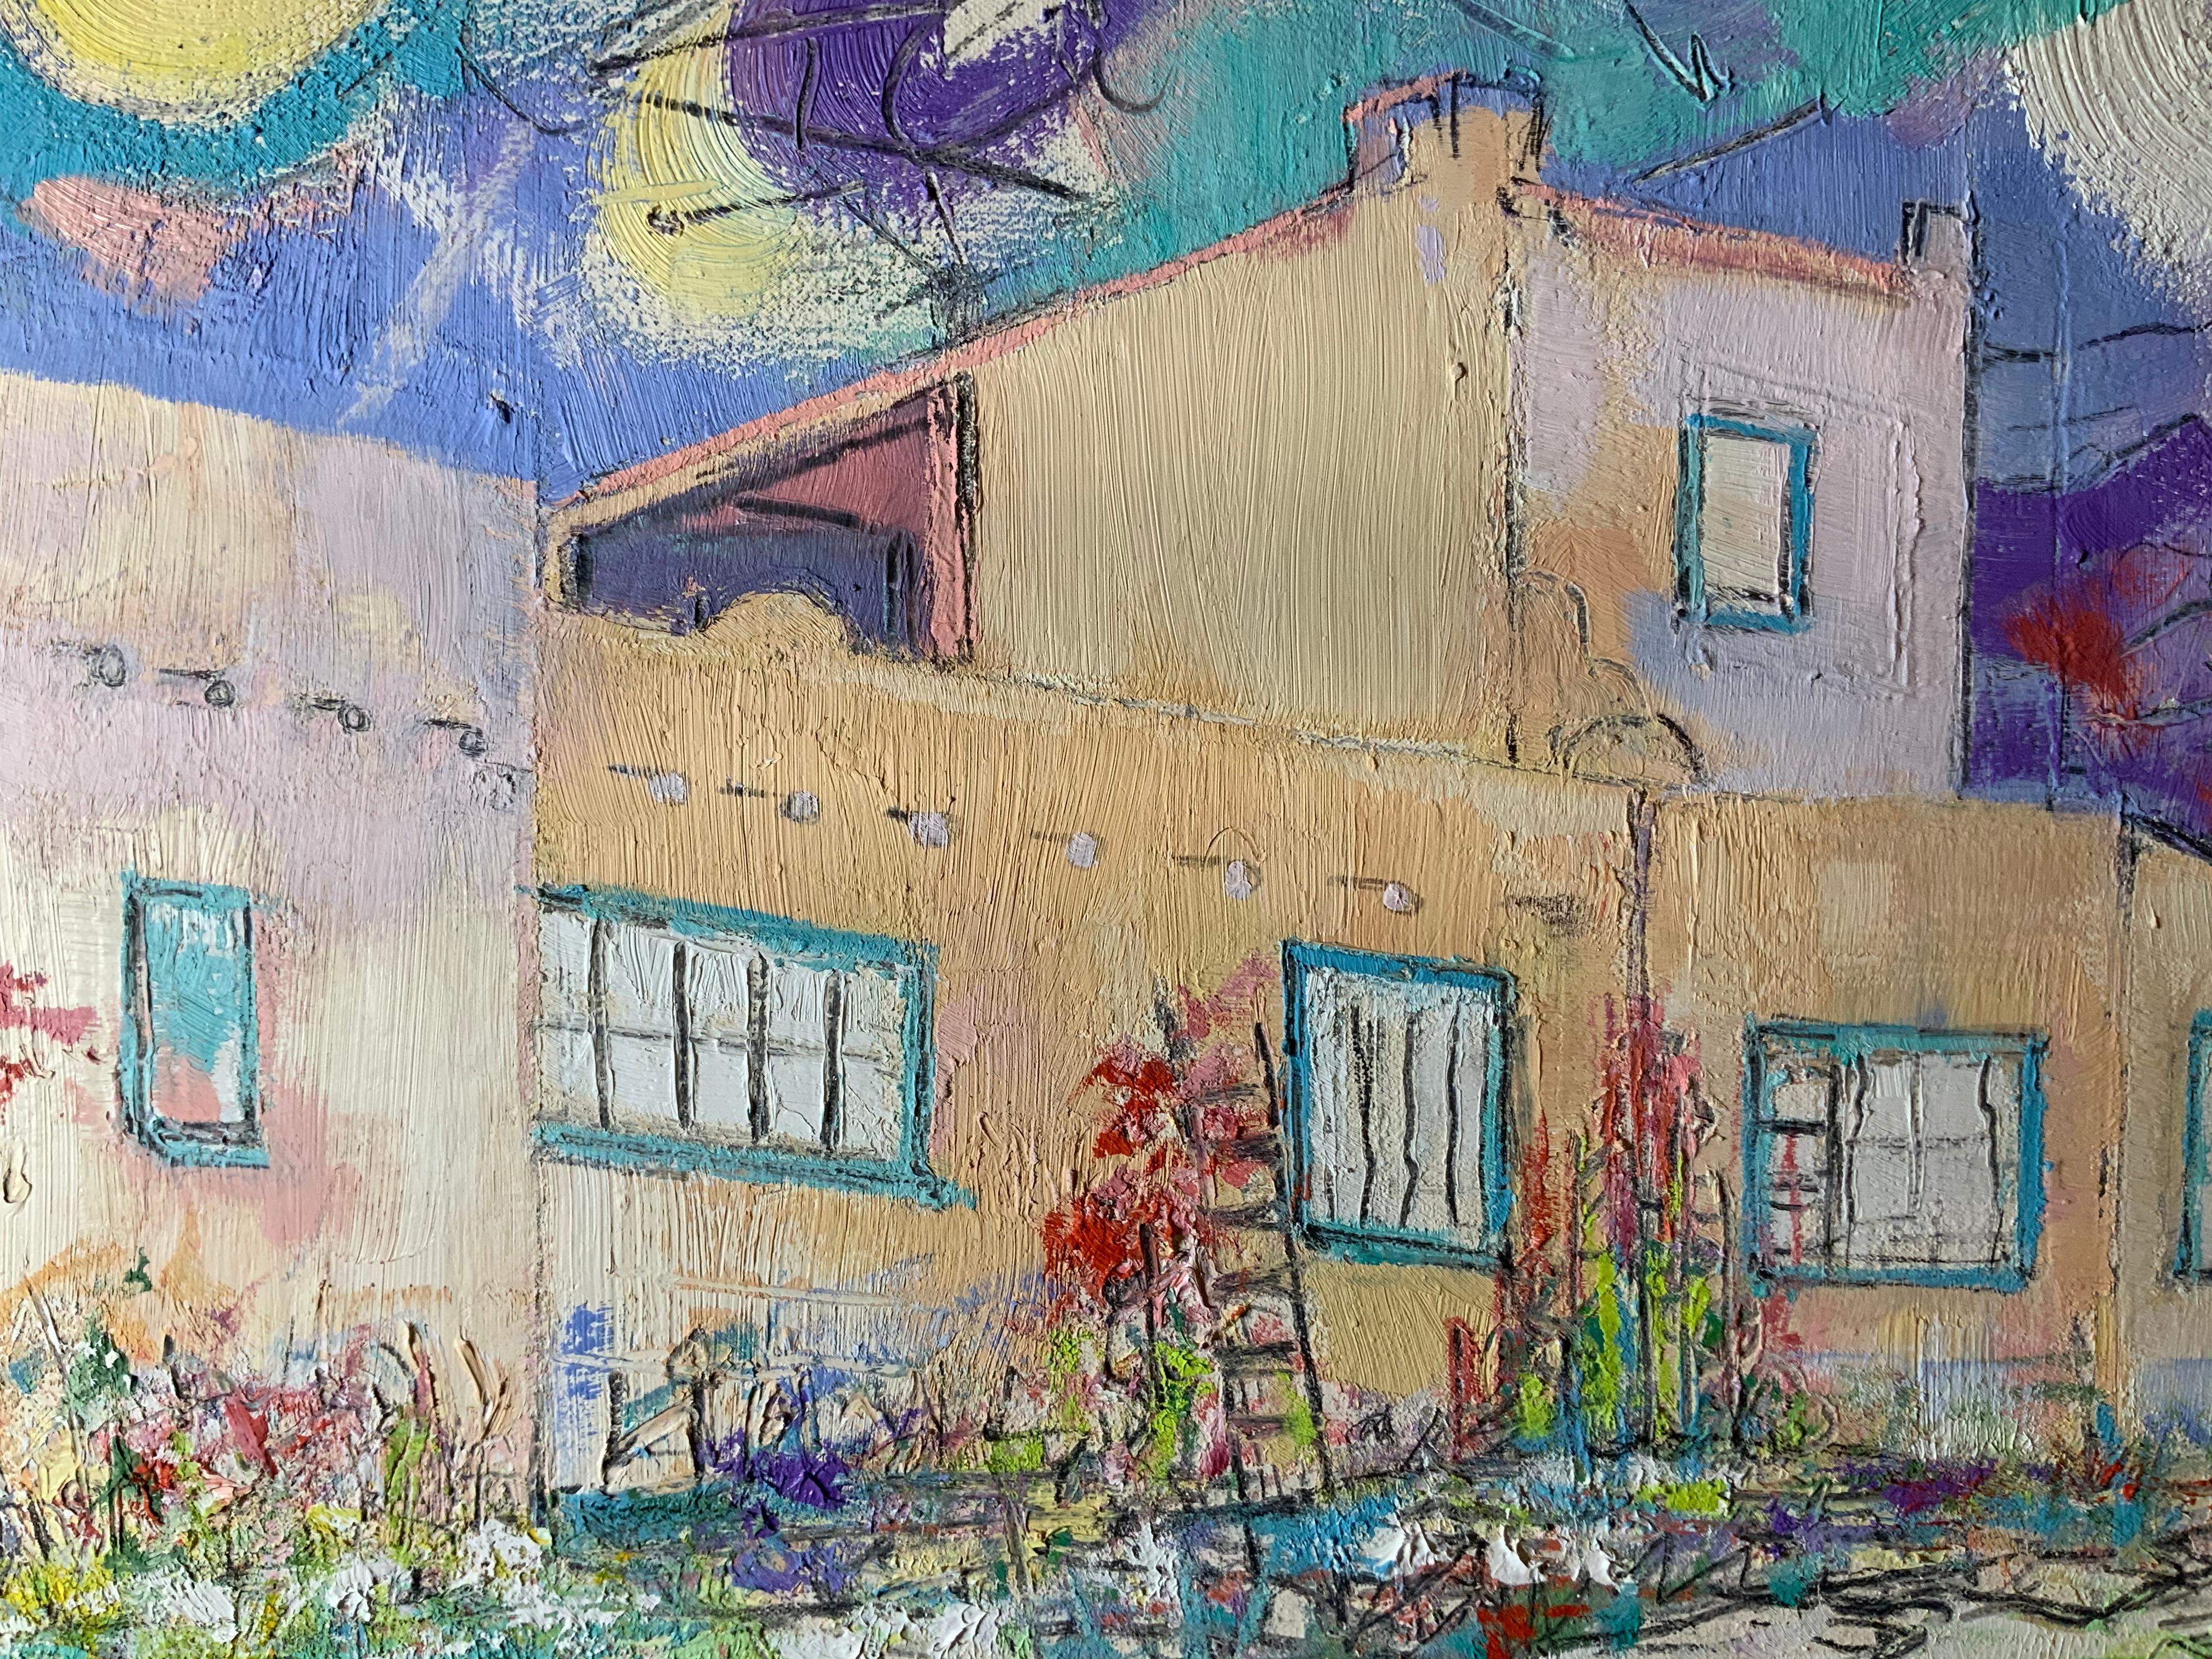 Laurie Hill Phelps has been a painter for 37 years in Taos New Mexico. Her water colors and oils represent the colorful images of Northern New Mexico. Laurie's paintings have a life of their own. Her work can be found in several private and